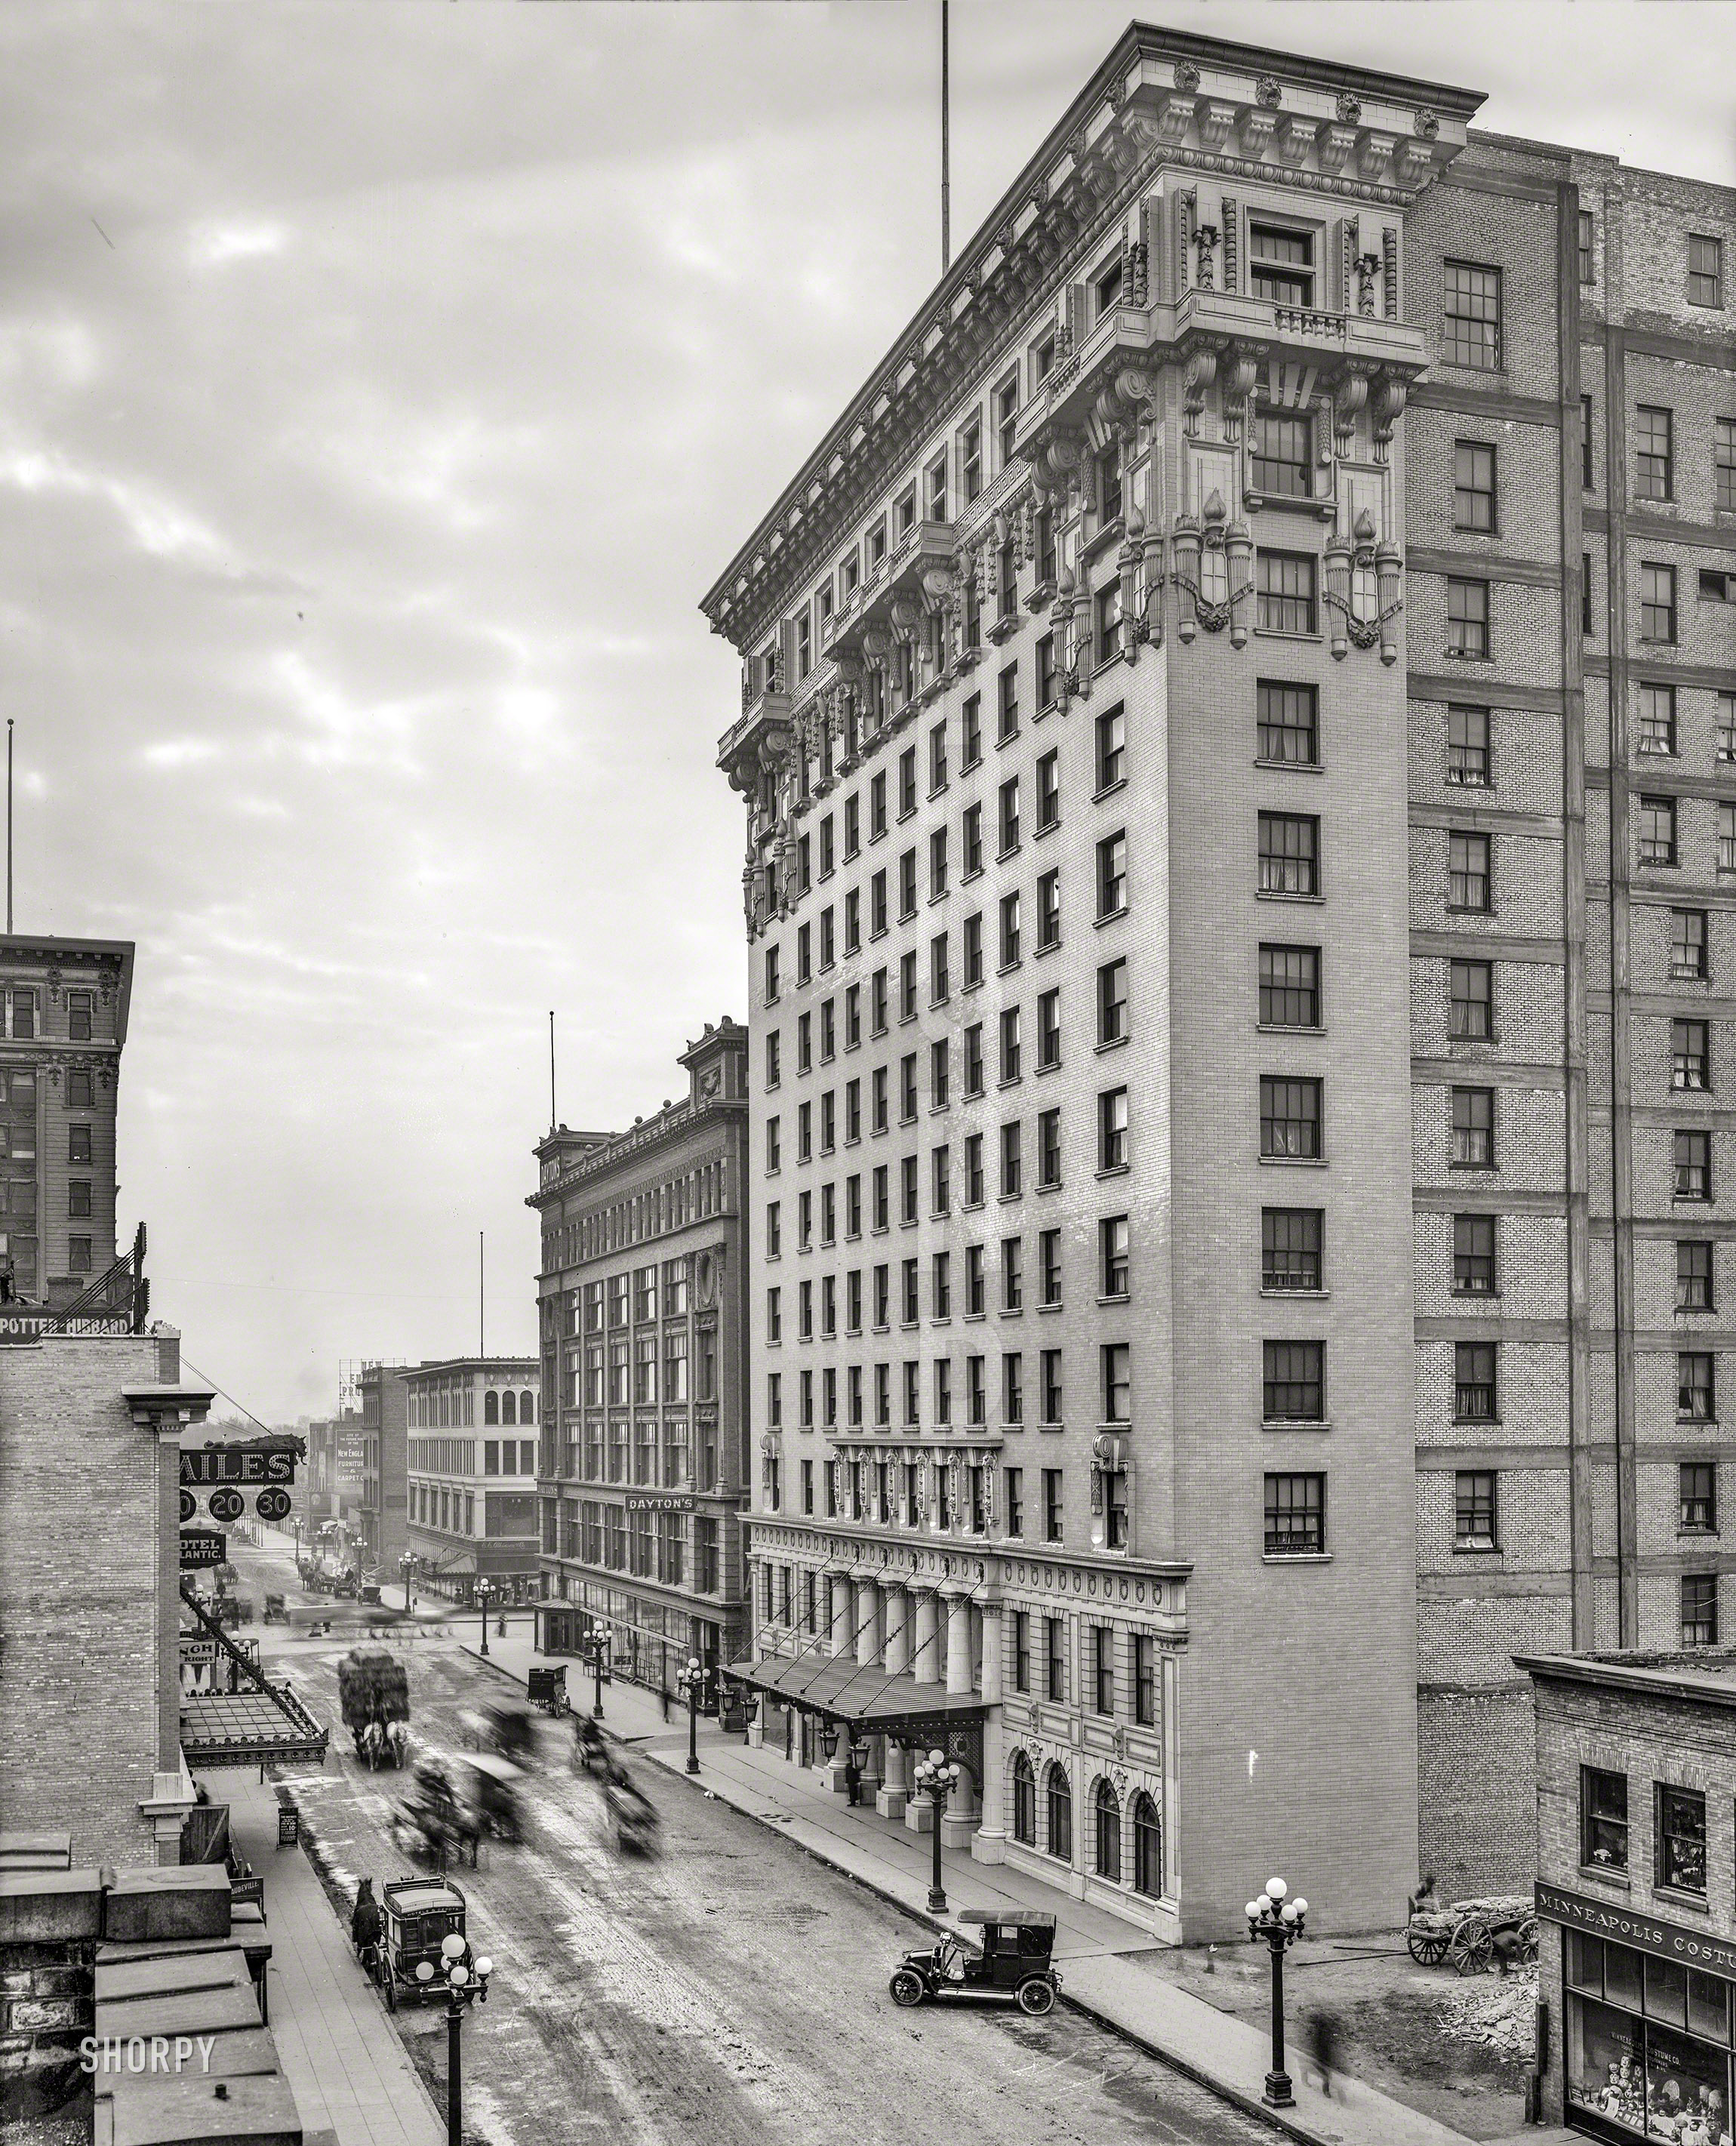 Minneapolis circa 1910. "Hotel Radisson and Seventh Street." The start of today's multinational lodging conglomerate, named after the 17th-century French explorer Pierre-Esprit Radisson. 8x10 inch dry plate glass negative. View full size.